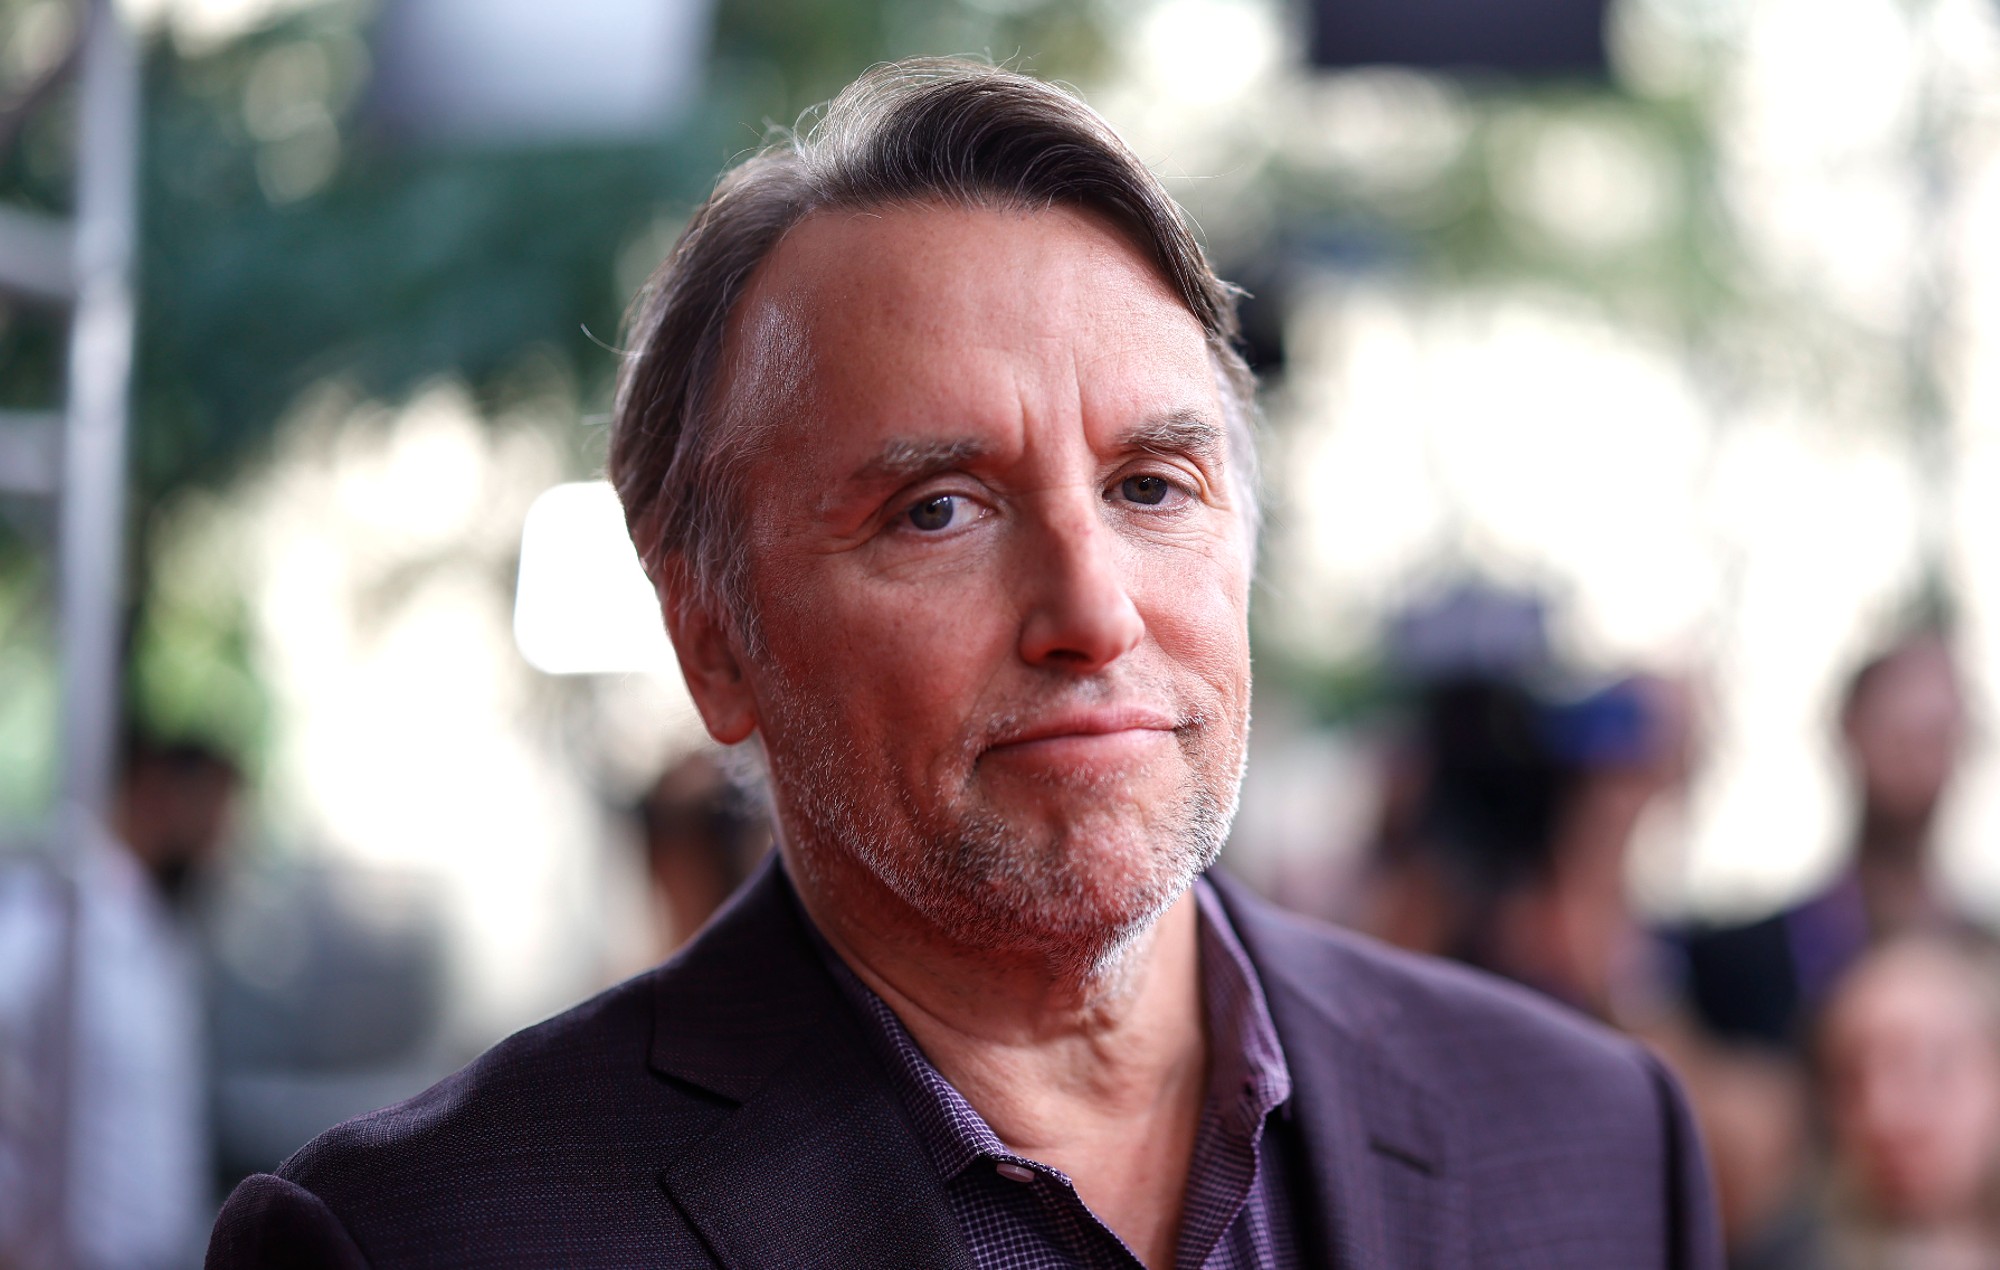 ‘School Of Rock’ “didn’t feel like a big hit” at first, says director Richard Linklater